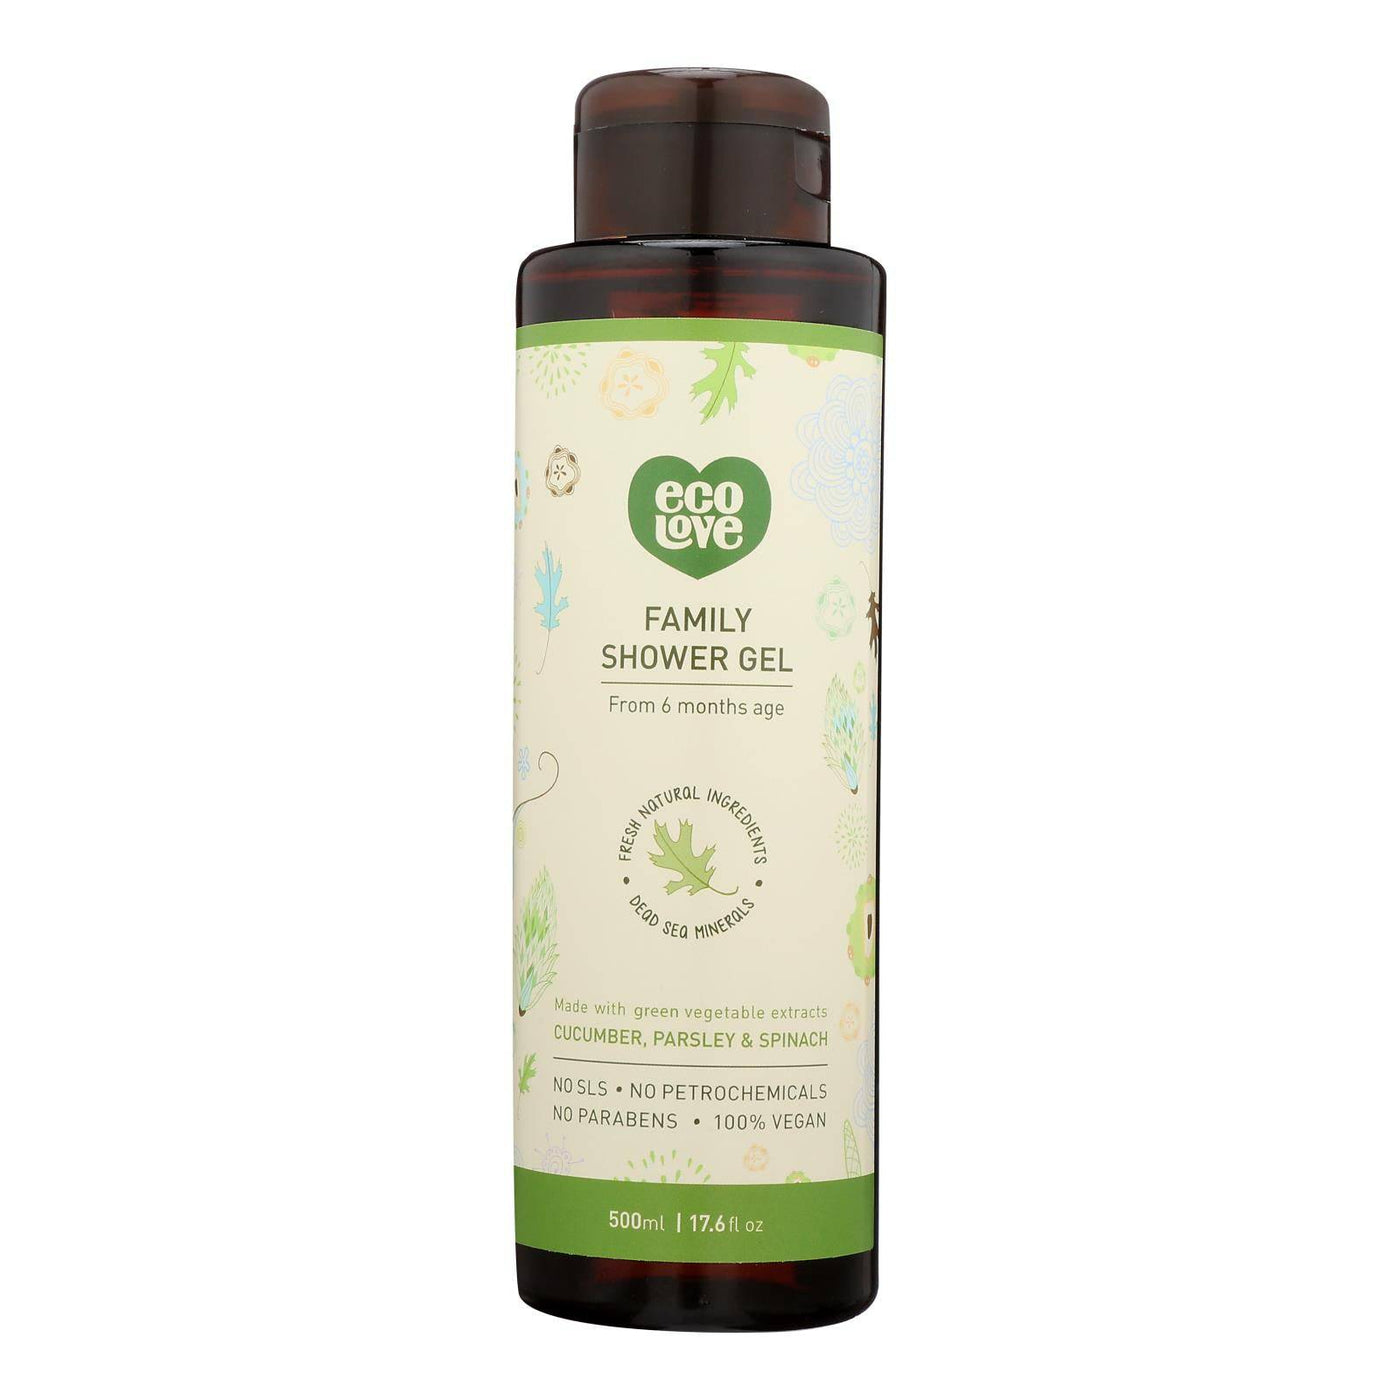 Buy Ecolove Body Wash Green Vegetables Family Shower Gel For Ages 6 Months And Up - Case Of 500 - 17.6 Fl Oz.  at OnlyNaturals.us